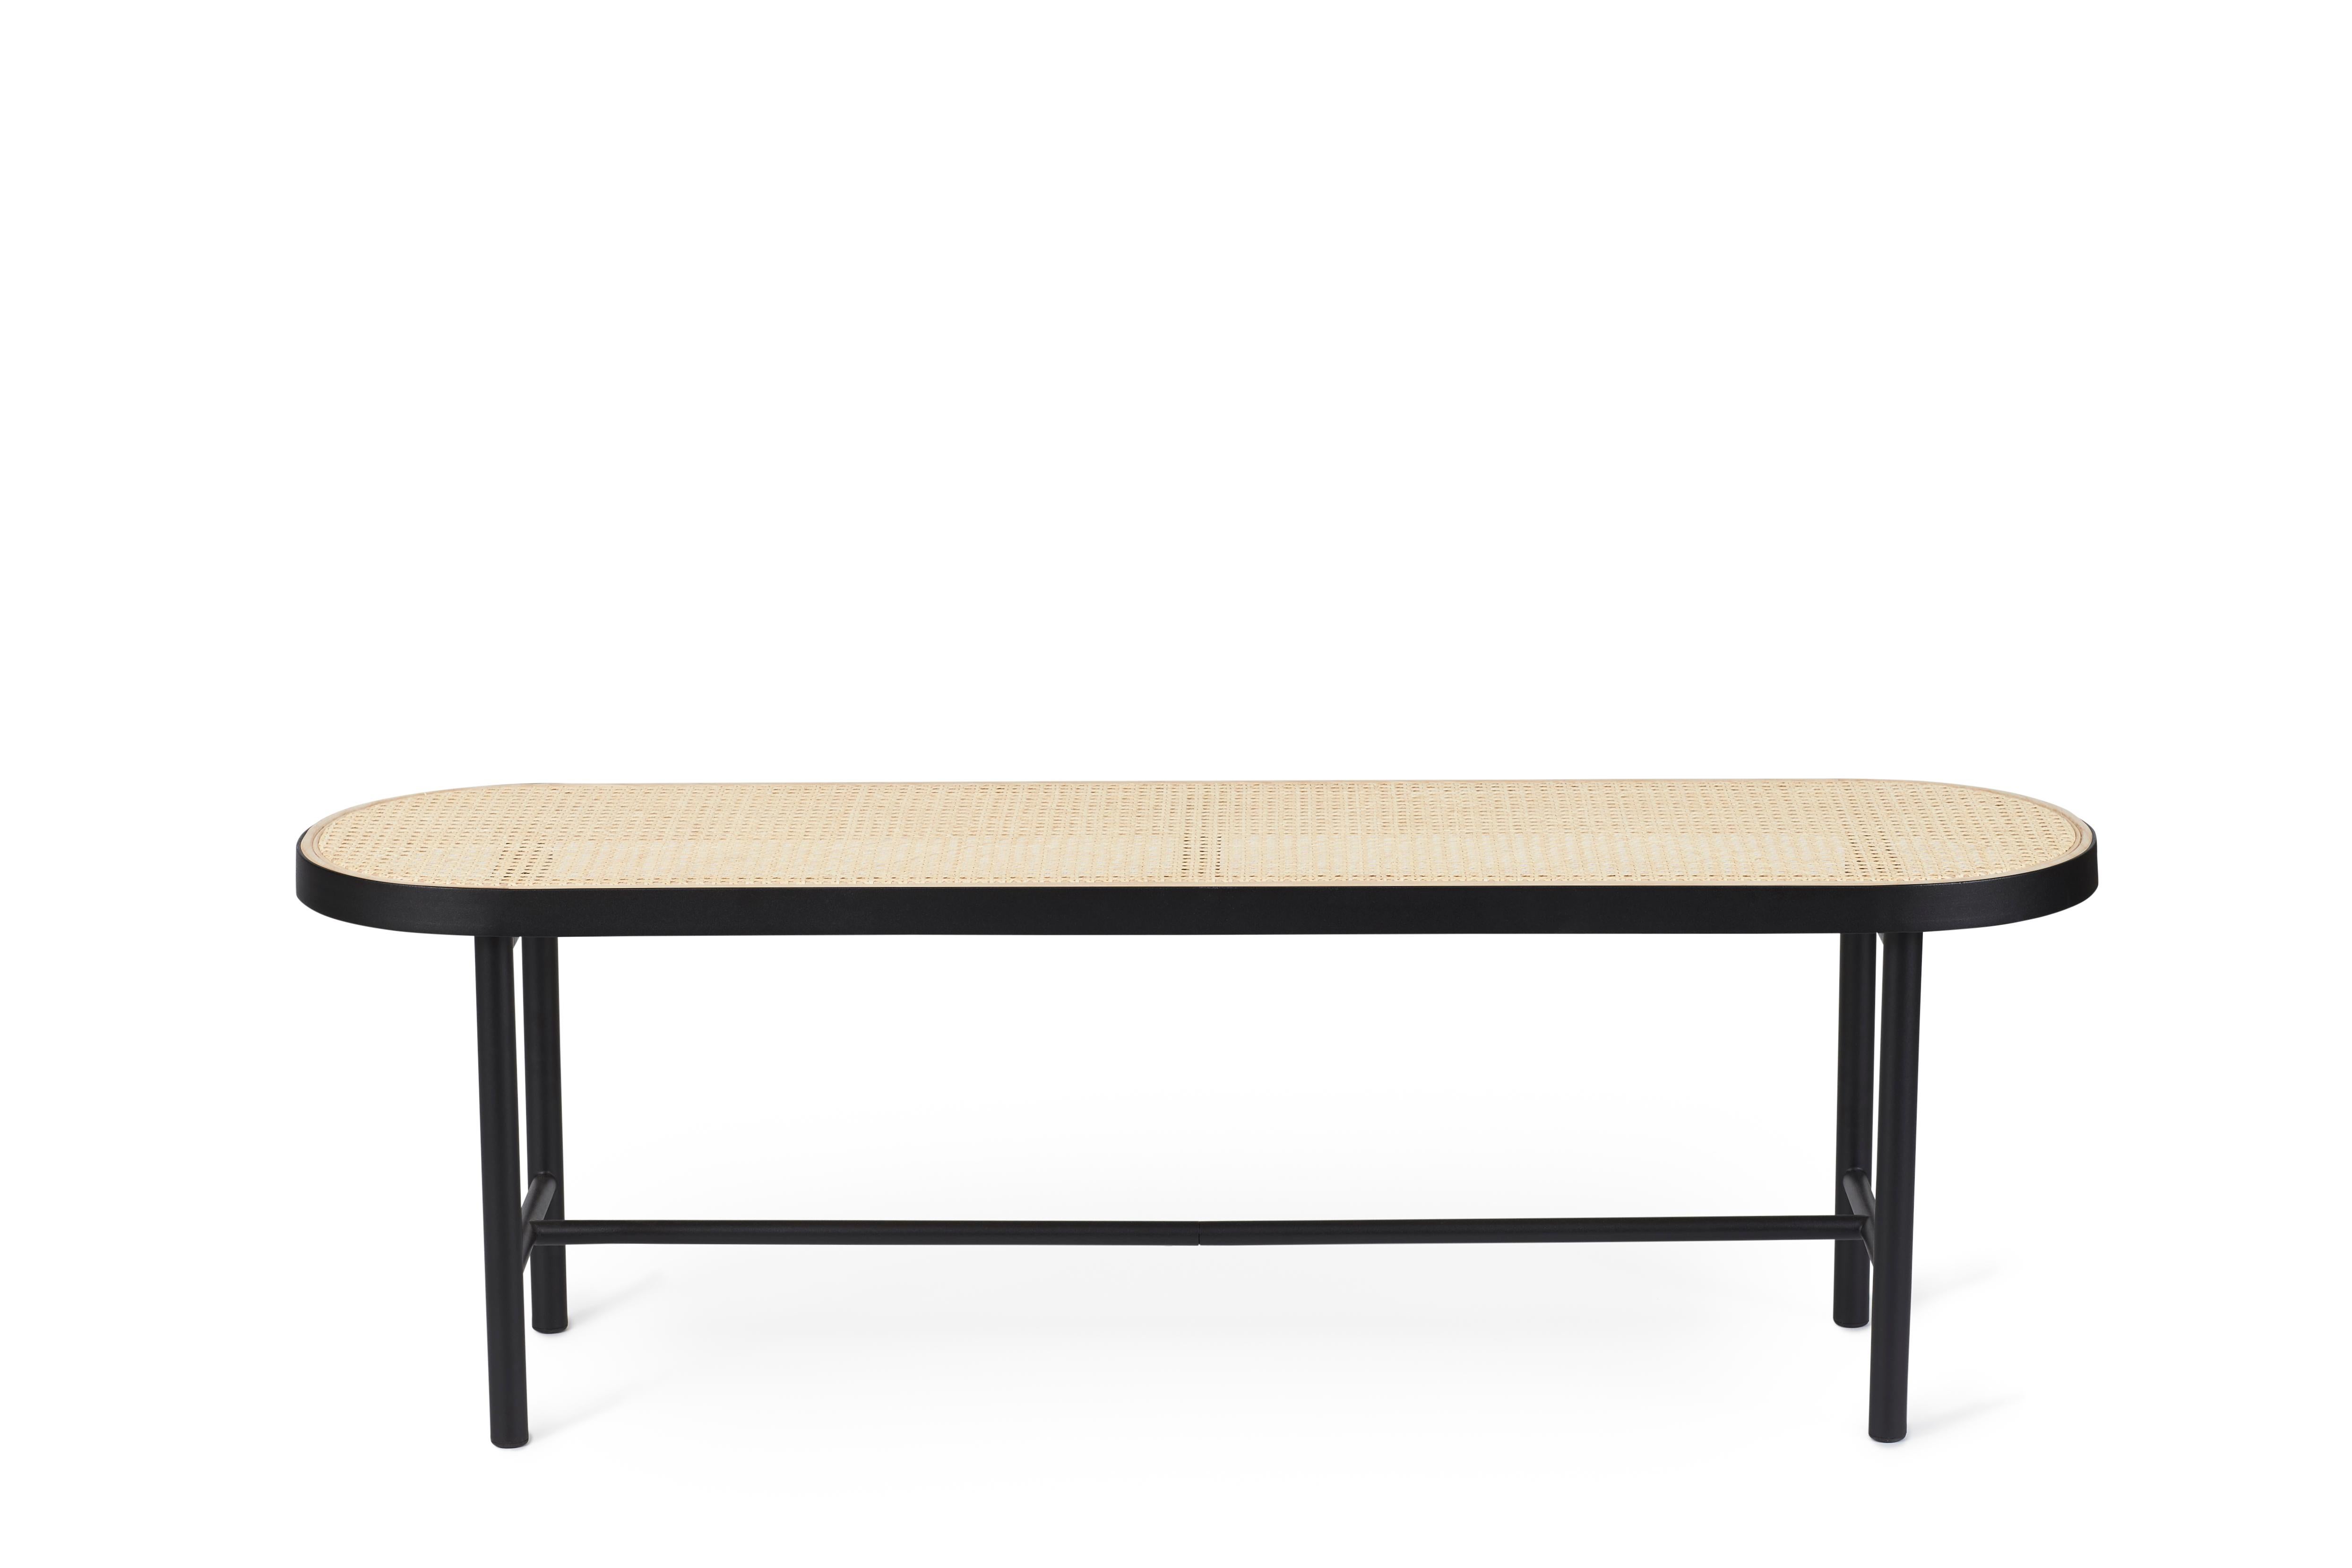 For Sale: Black (Cane / Black) Be My Guest Bench, by Charlotte Høncke from Warm Nordic 2